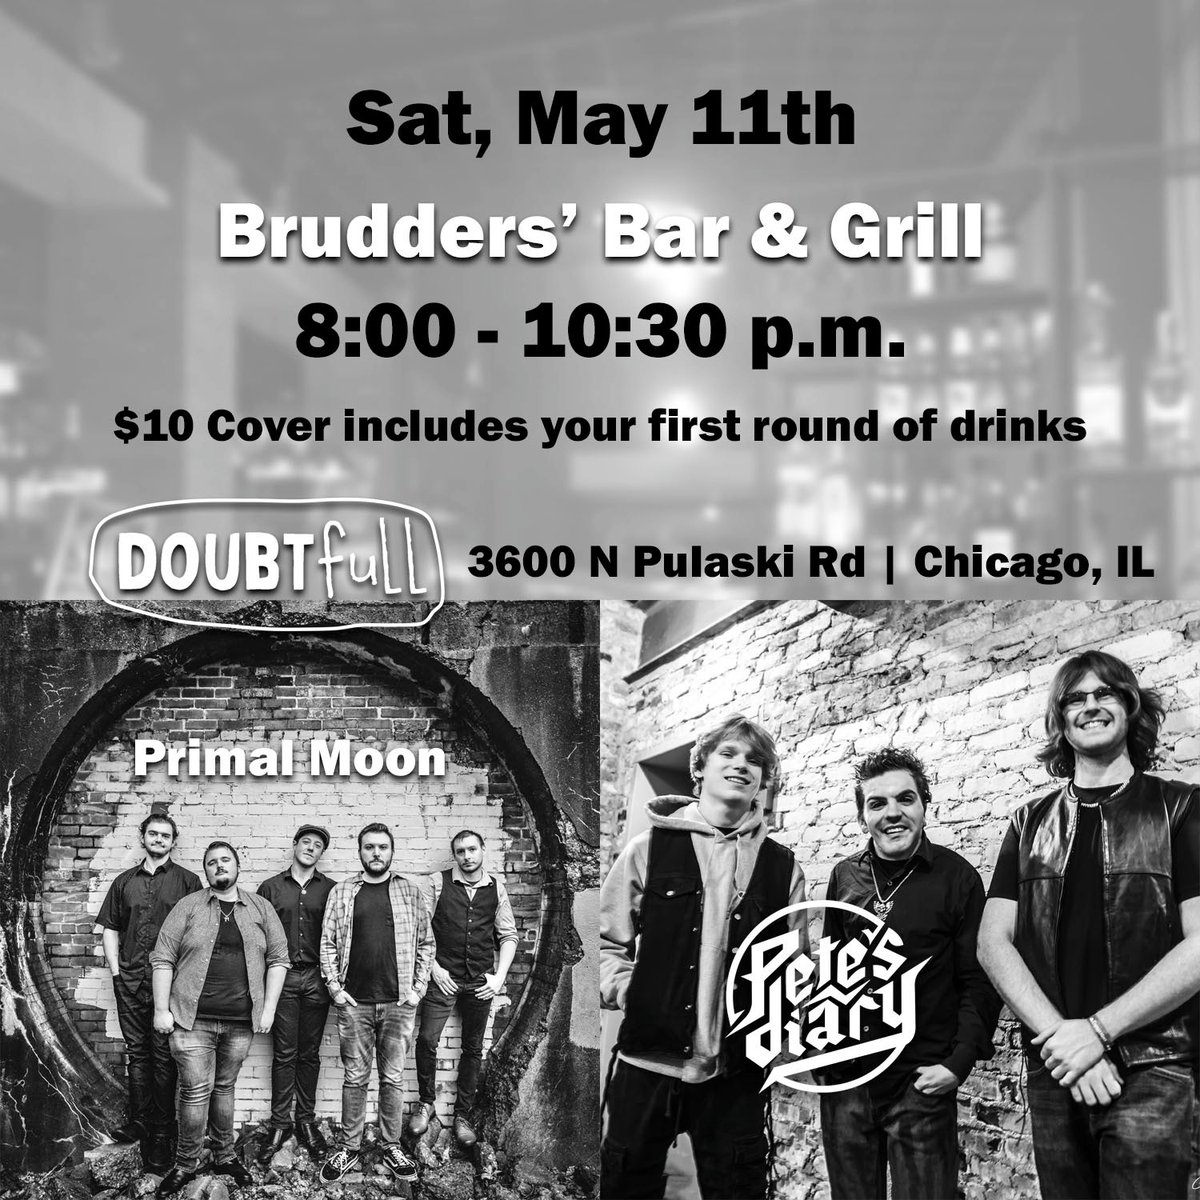 Rock with #PetesDiary and two other #chicagobands this Saturday at Brudders in Chicago 🤘🏻

$10 Door Cover includes your first round of drinks 🍻

@petedank 🎸
#livemusic #chicagorock #newrock #chicagomusicscene